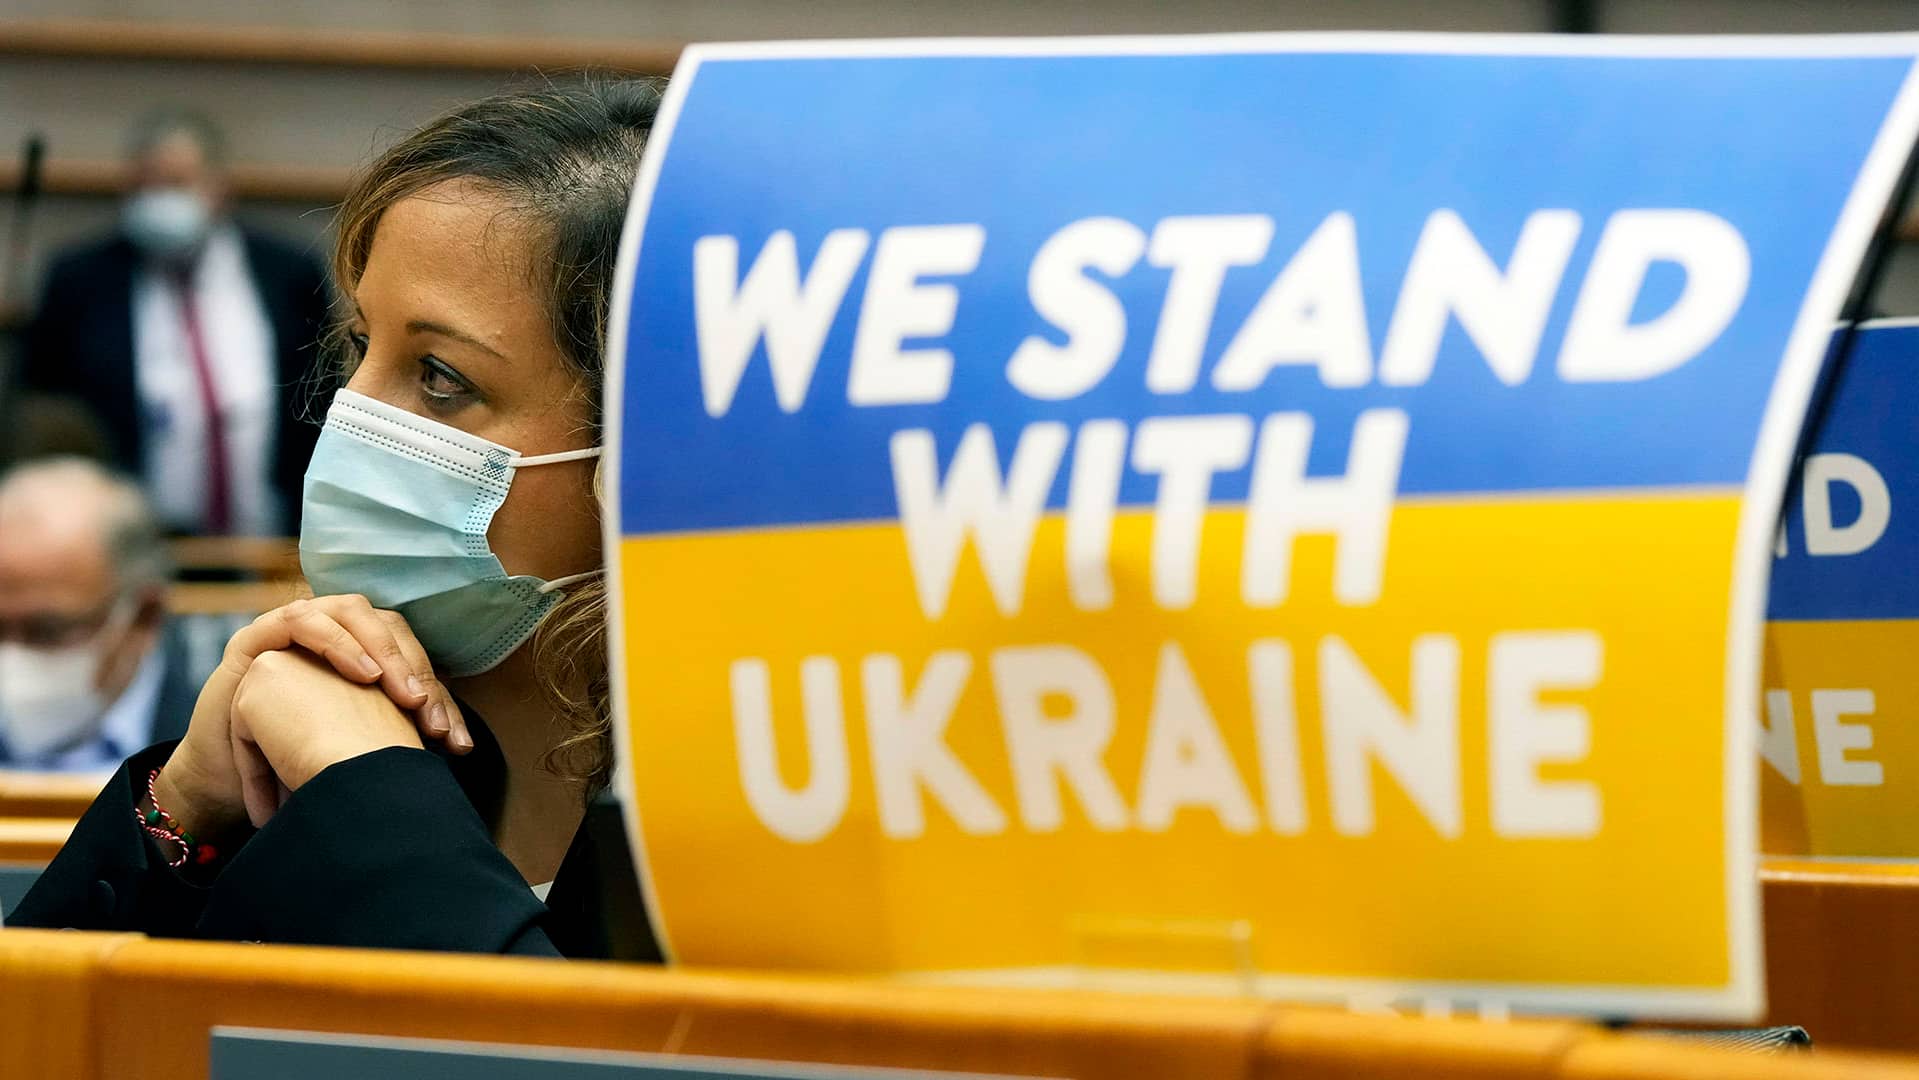 5 things to consider when donating to ukraine